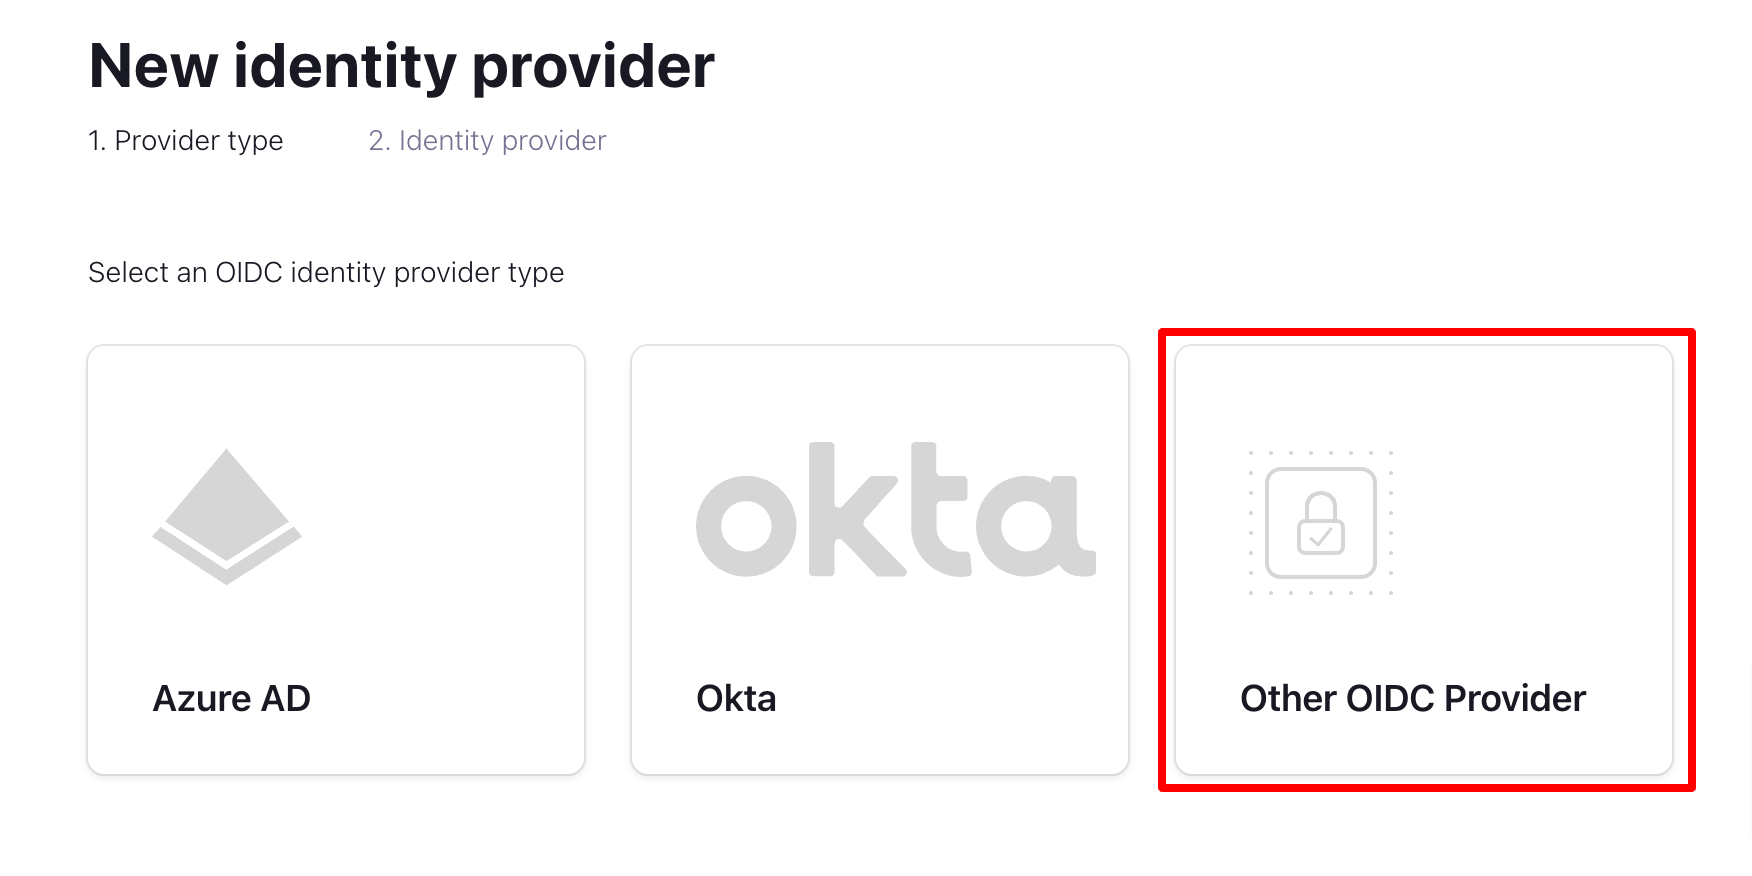 Other OIDC provider